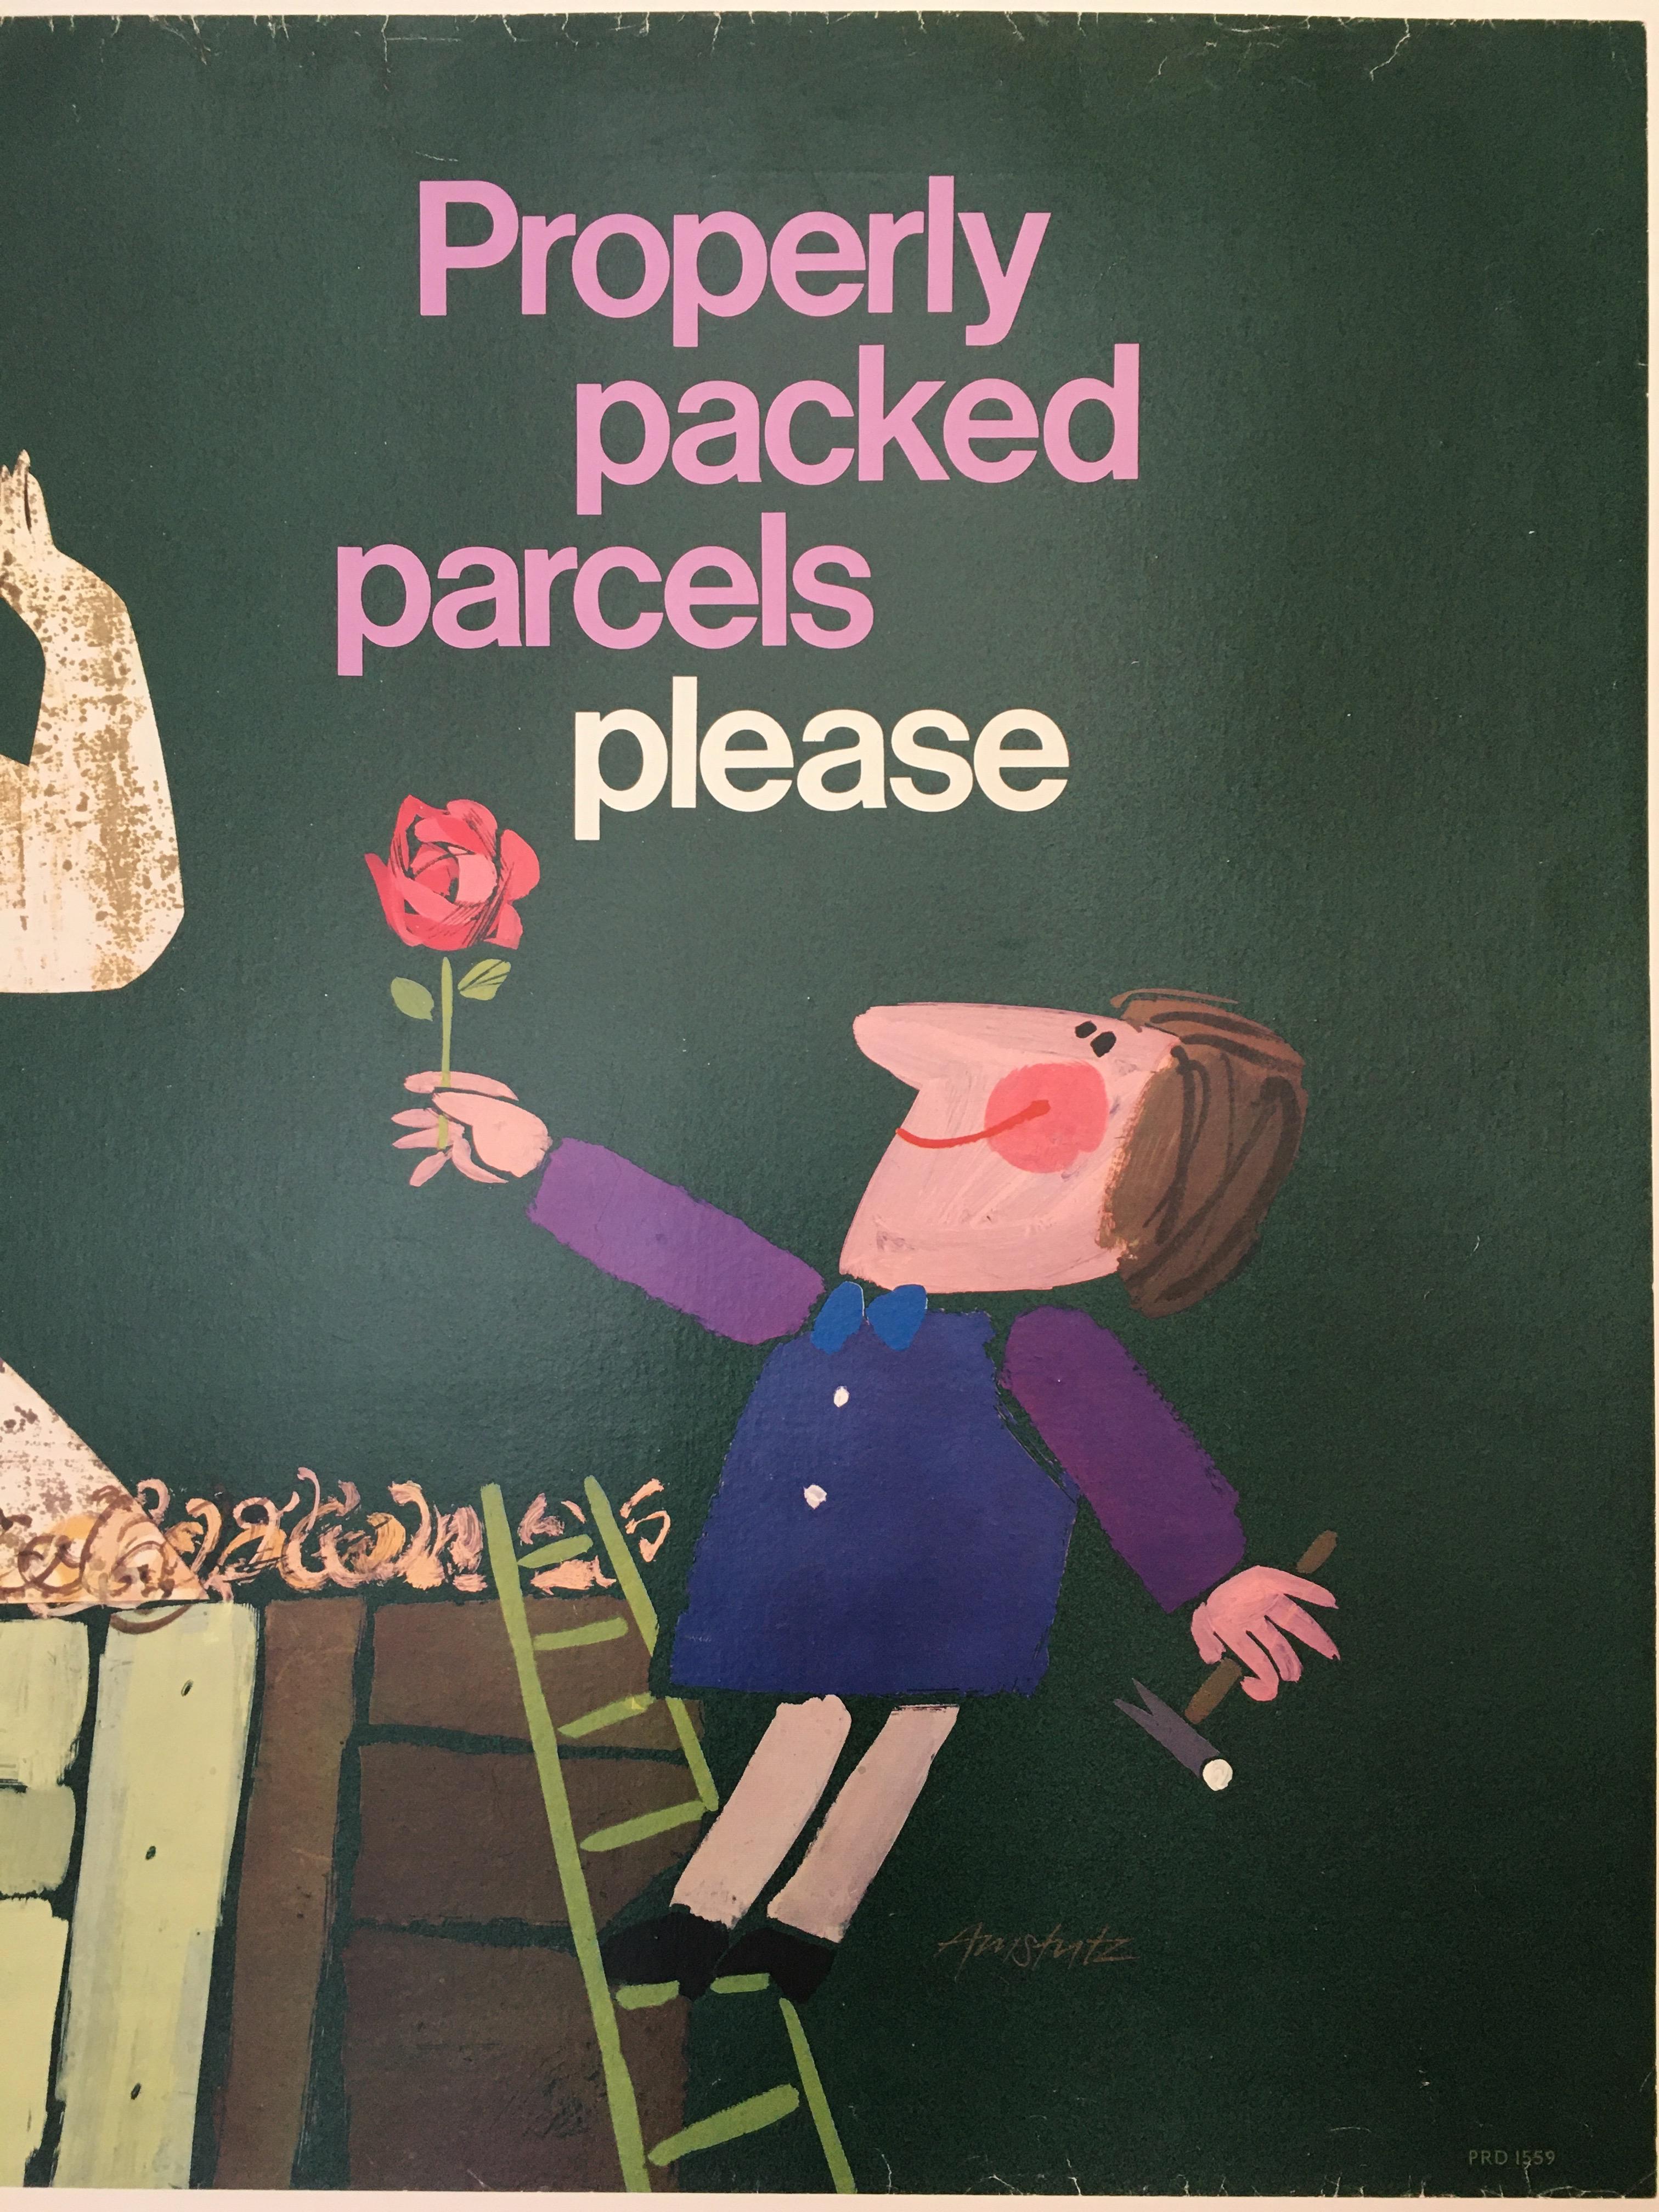 International Style Properly Packed Parcels Please, GPO Statue Original Vintage Poster, circa 1960